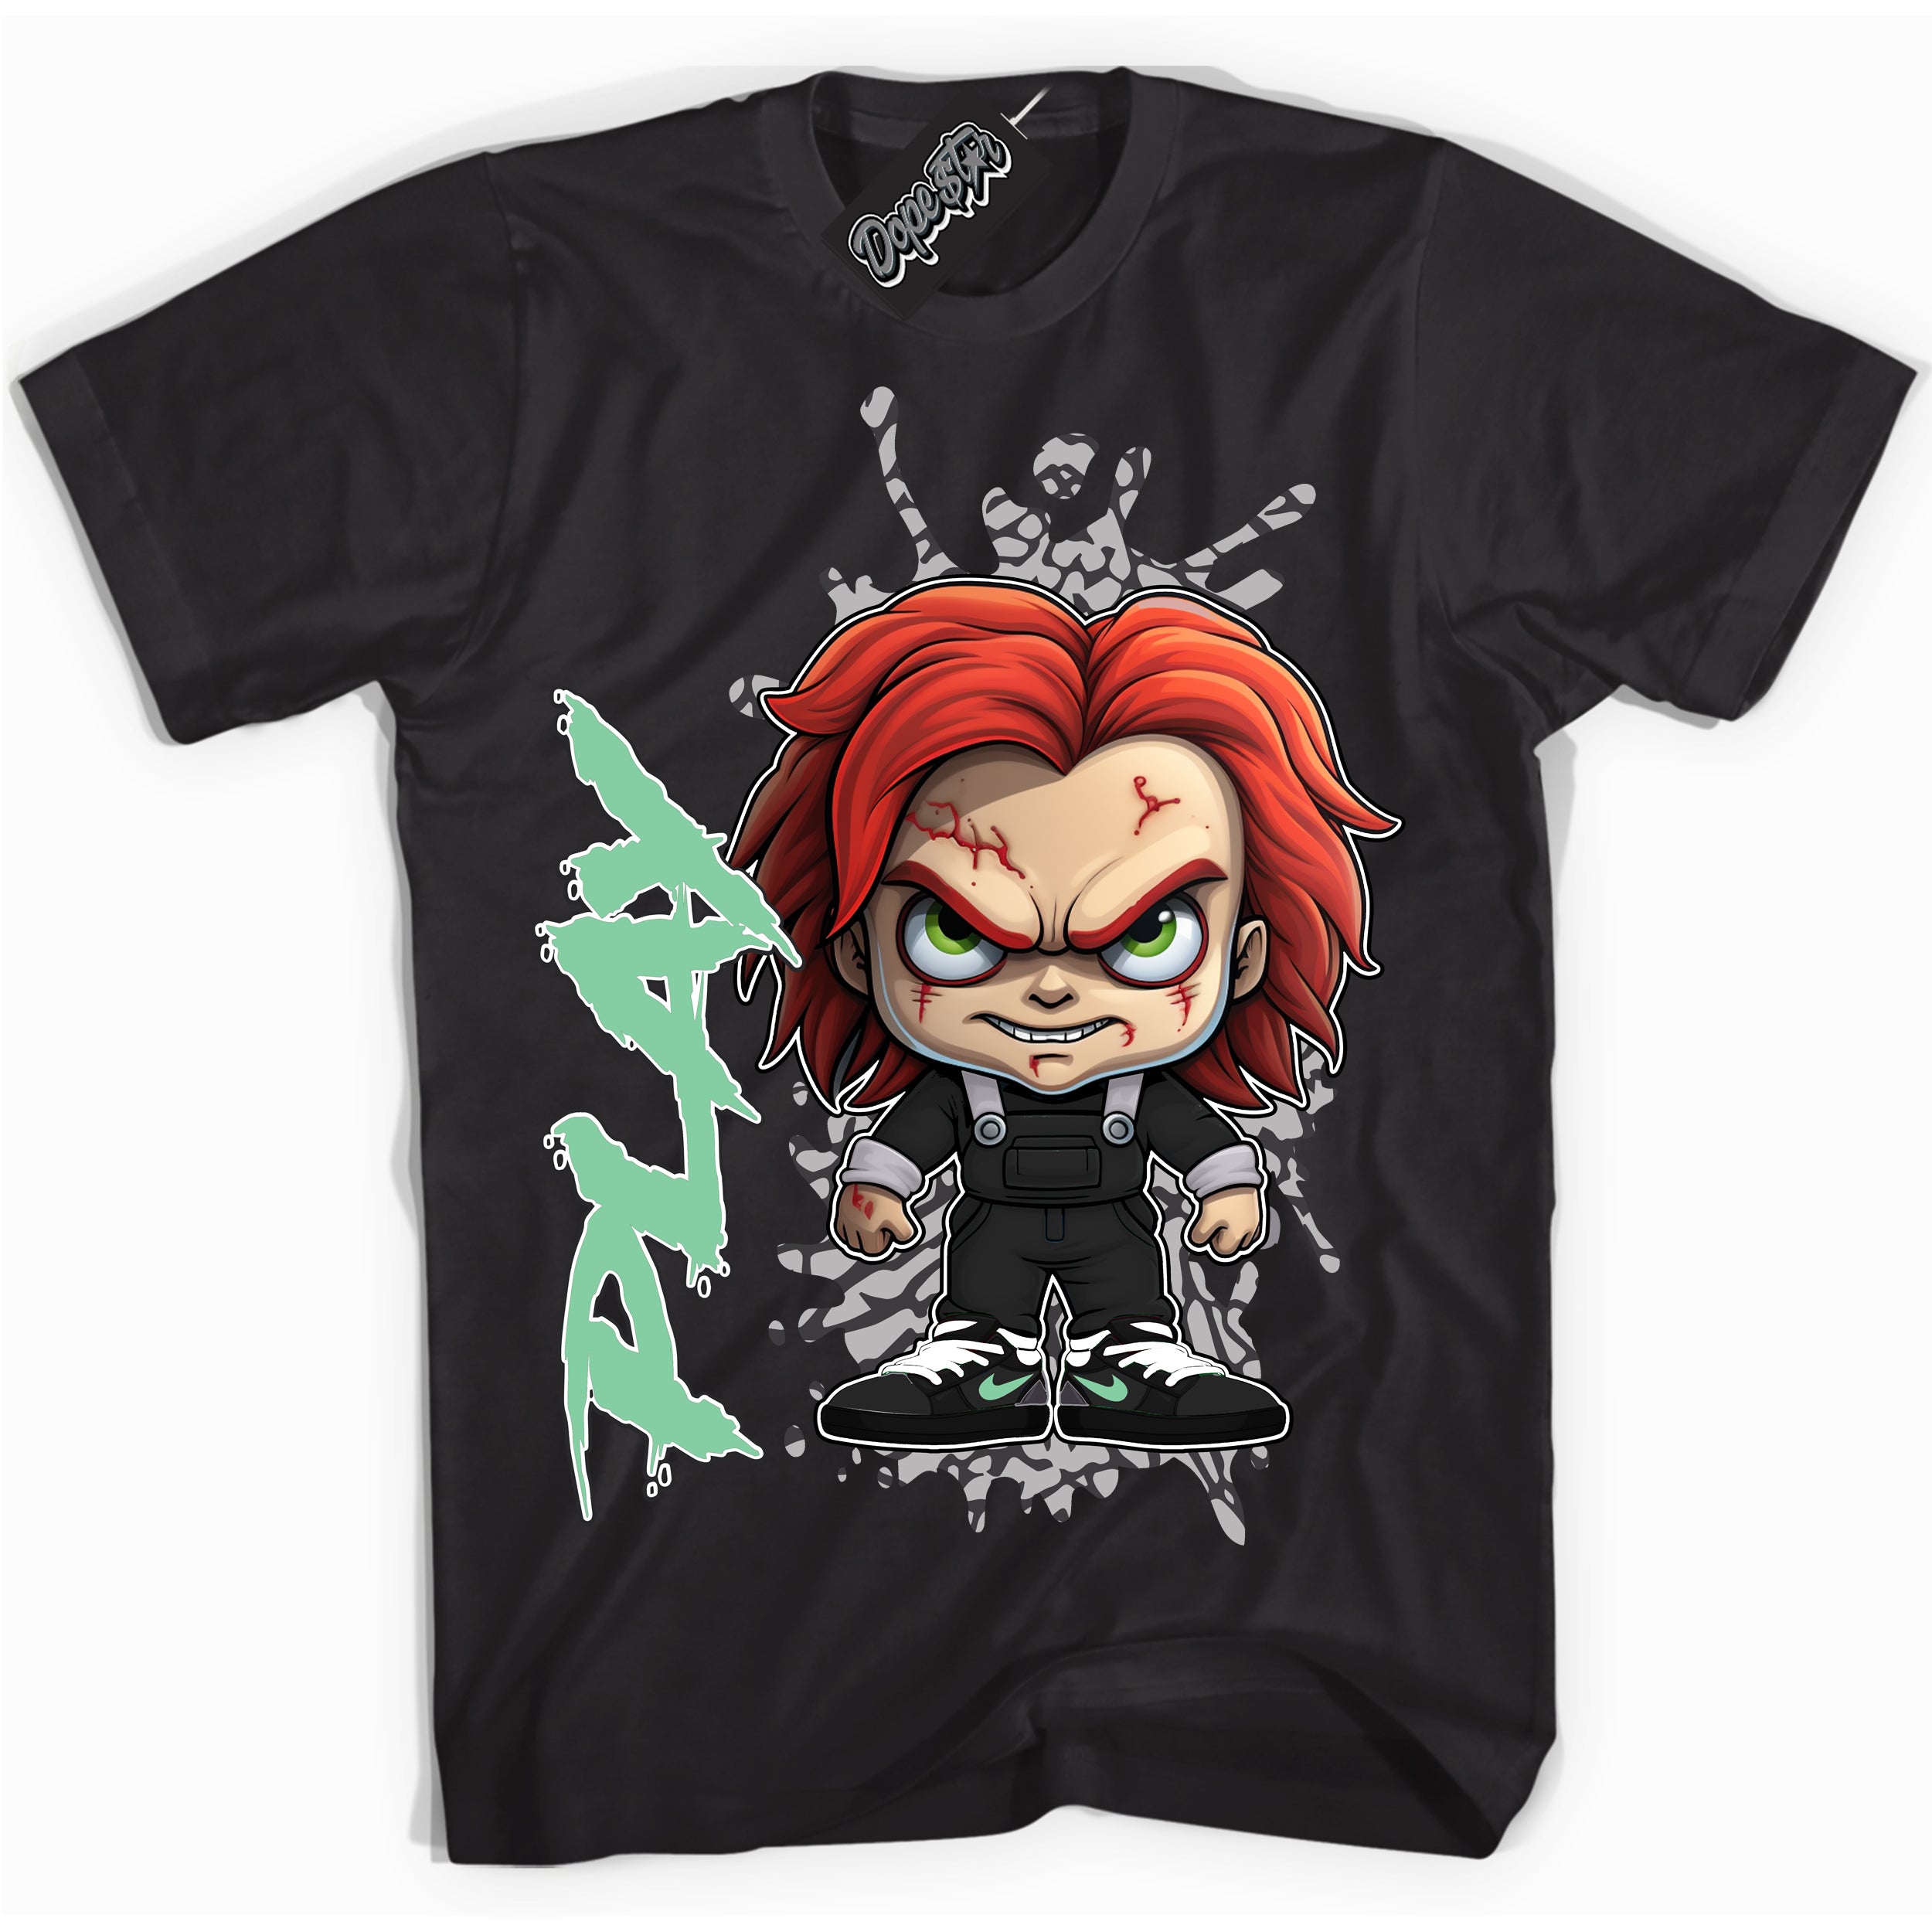 Cool Black graphic tee with “ Chucky Play ” design, that perfectly matches Green Glow 3s sneakers 